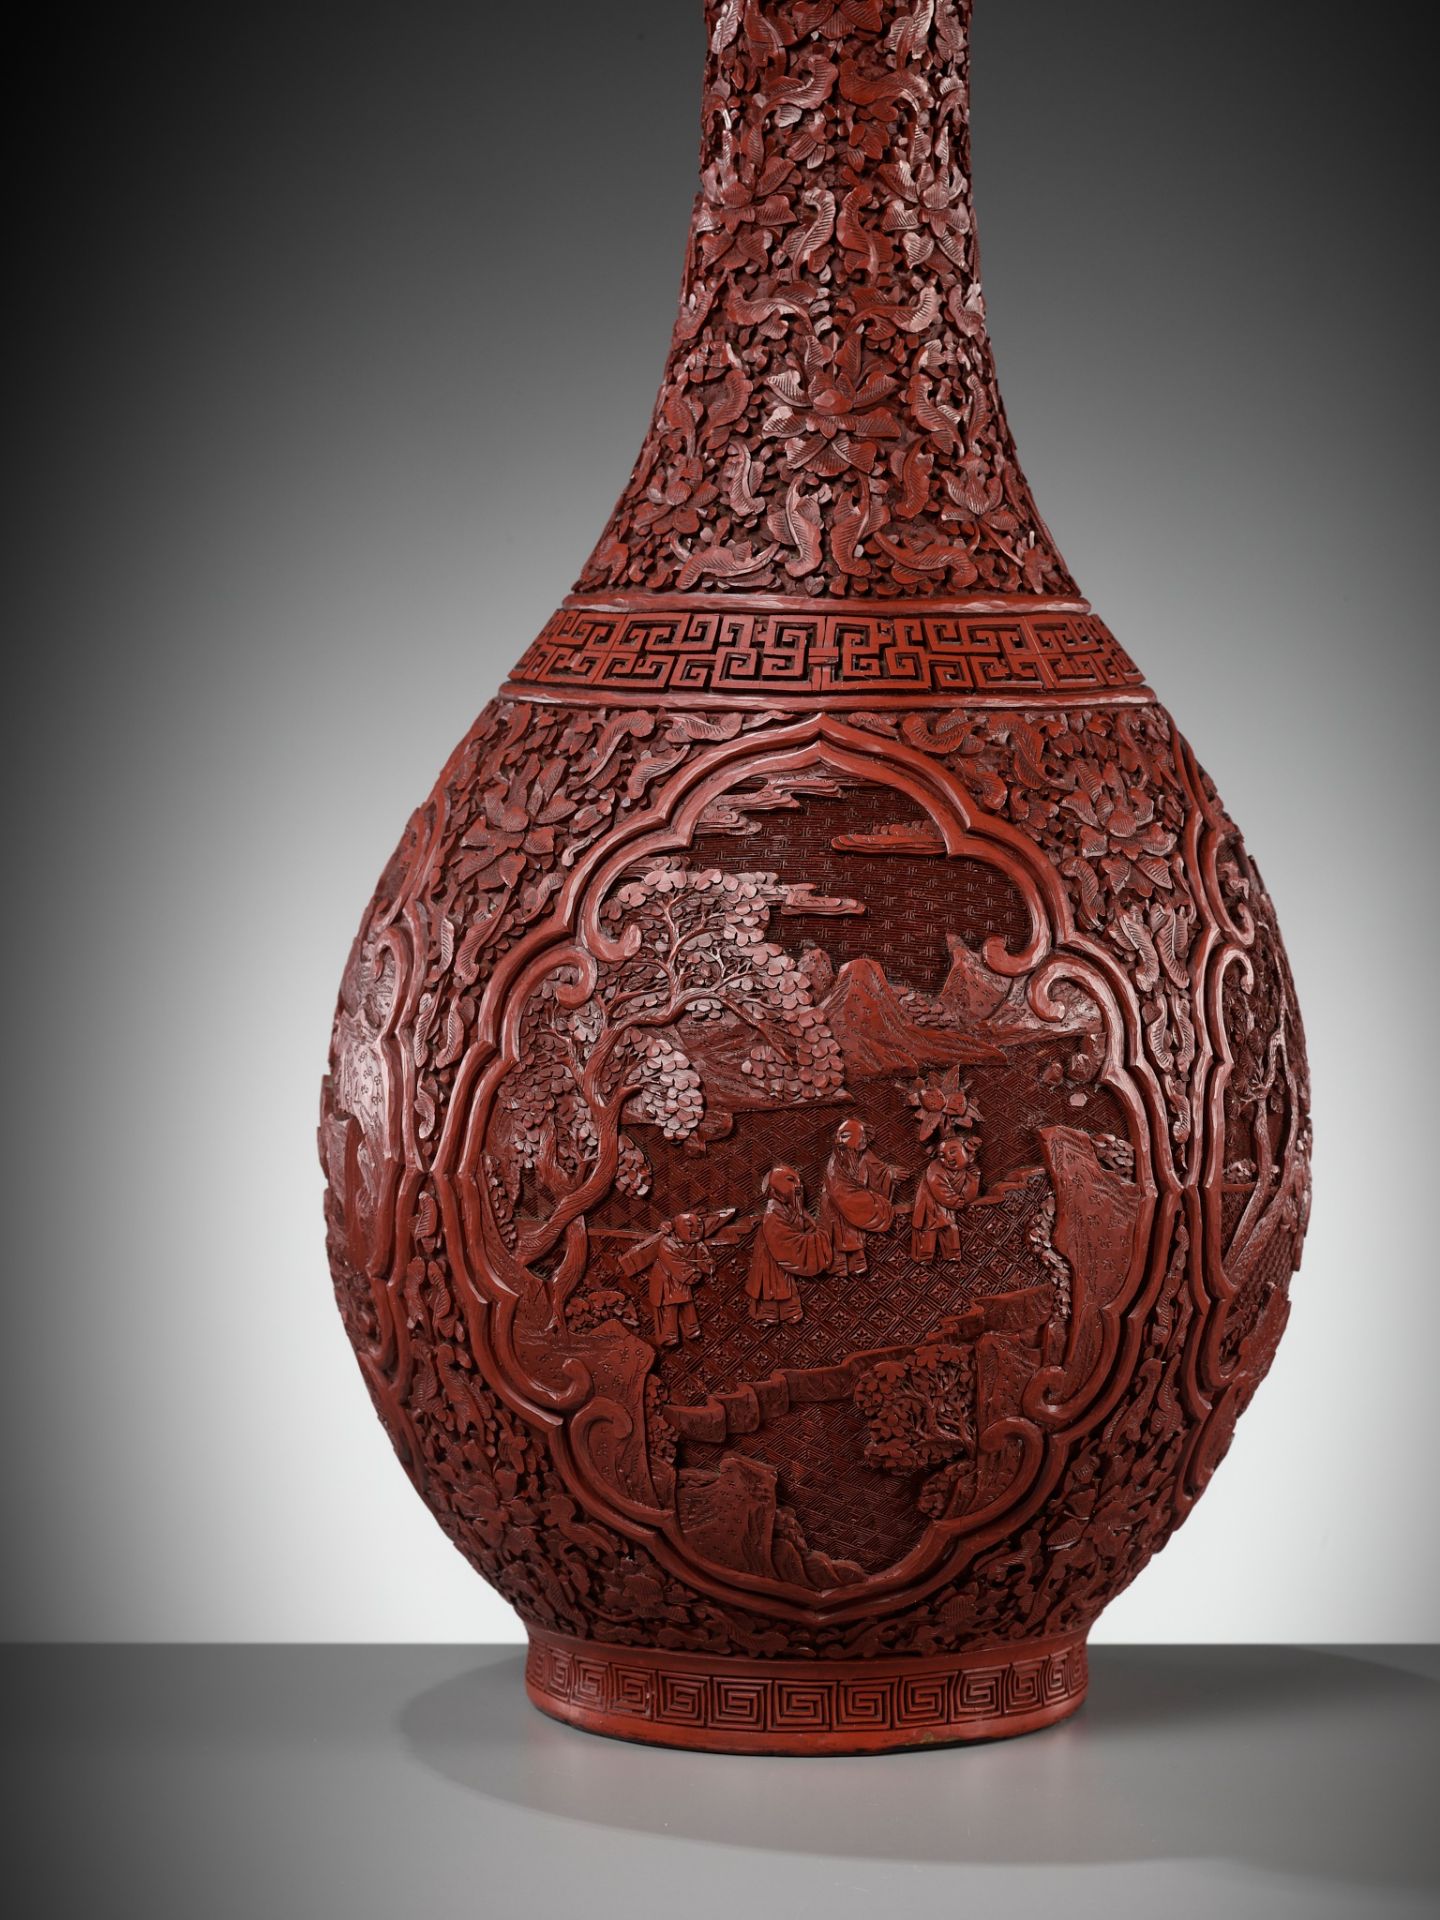 A PAIR OF LARGE CINNABAR LACQUER GARLIC HEAD VASES, CHINA, 1800-1850 - Image 6 of 14